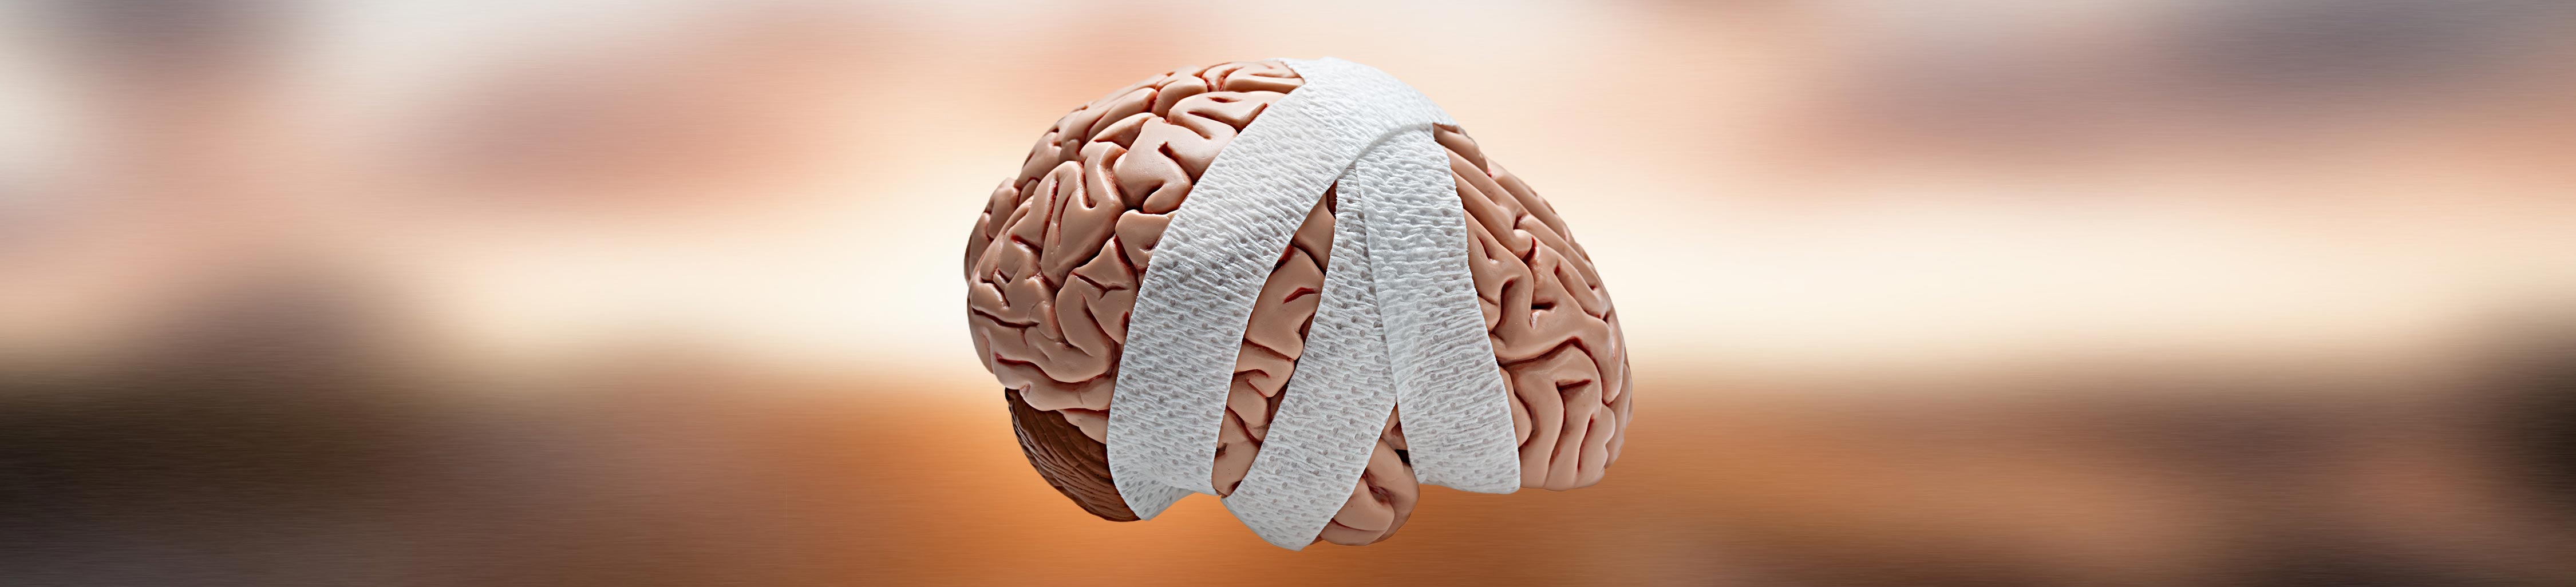 Image of a brain wrapped in a bandage indicating a traumatic brain injury.